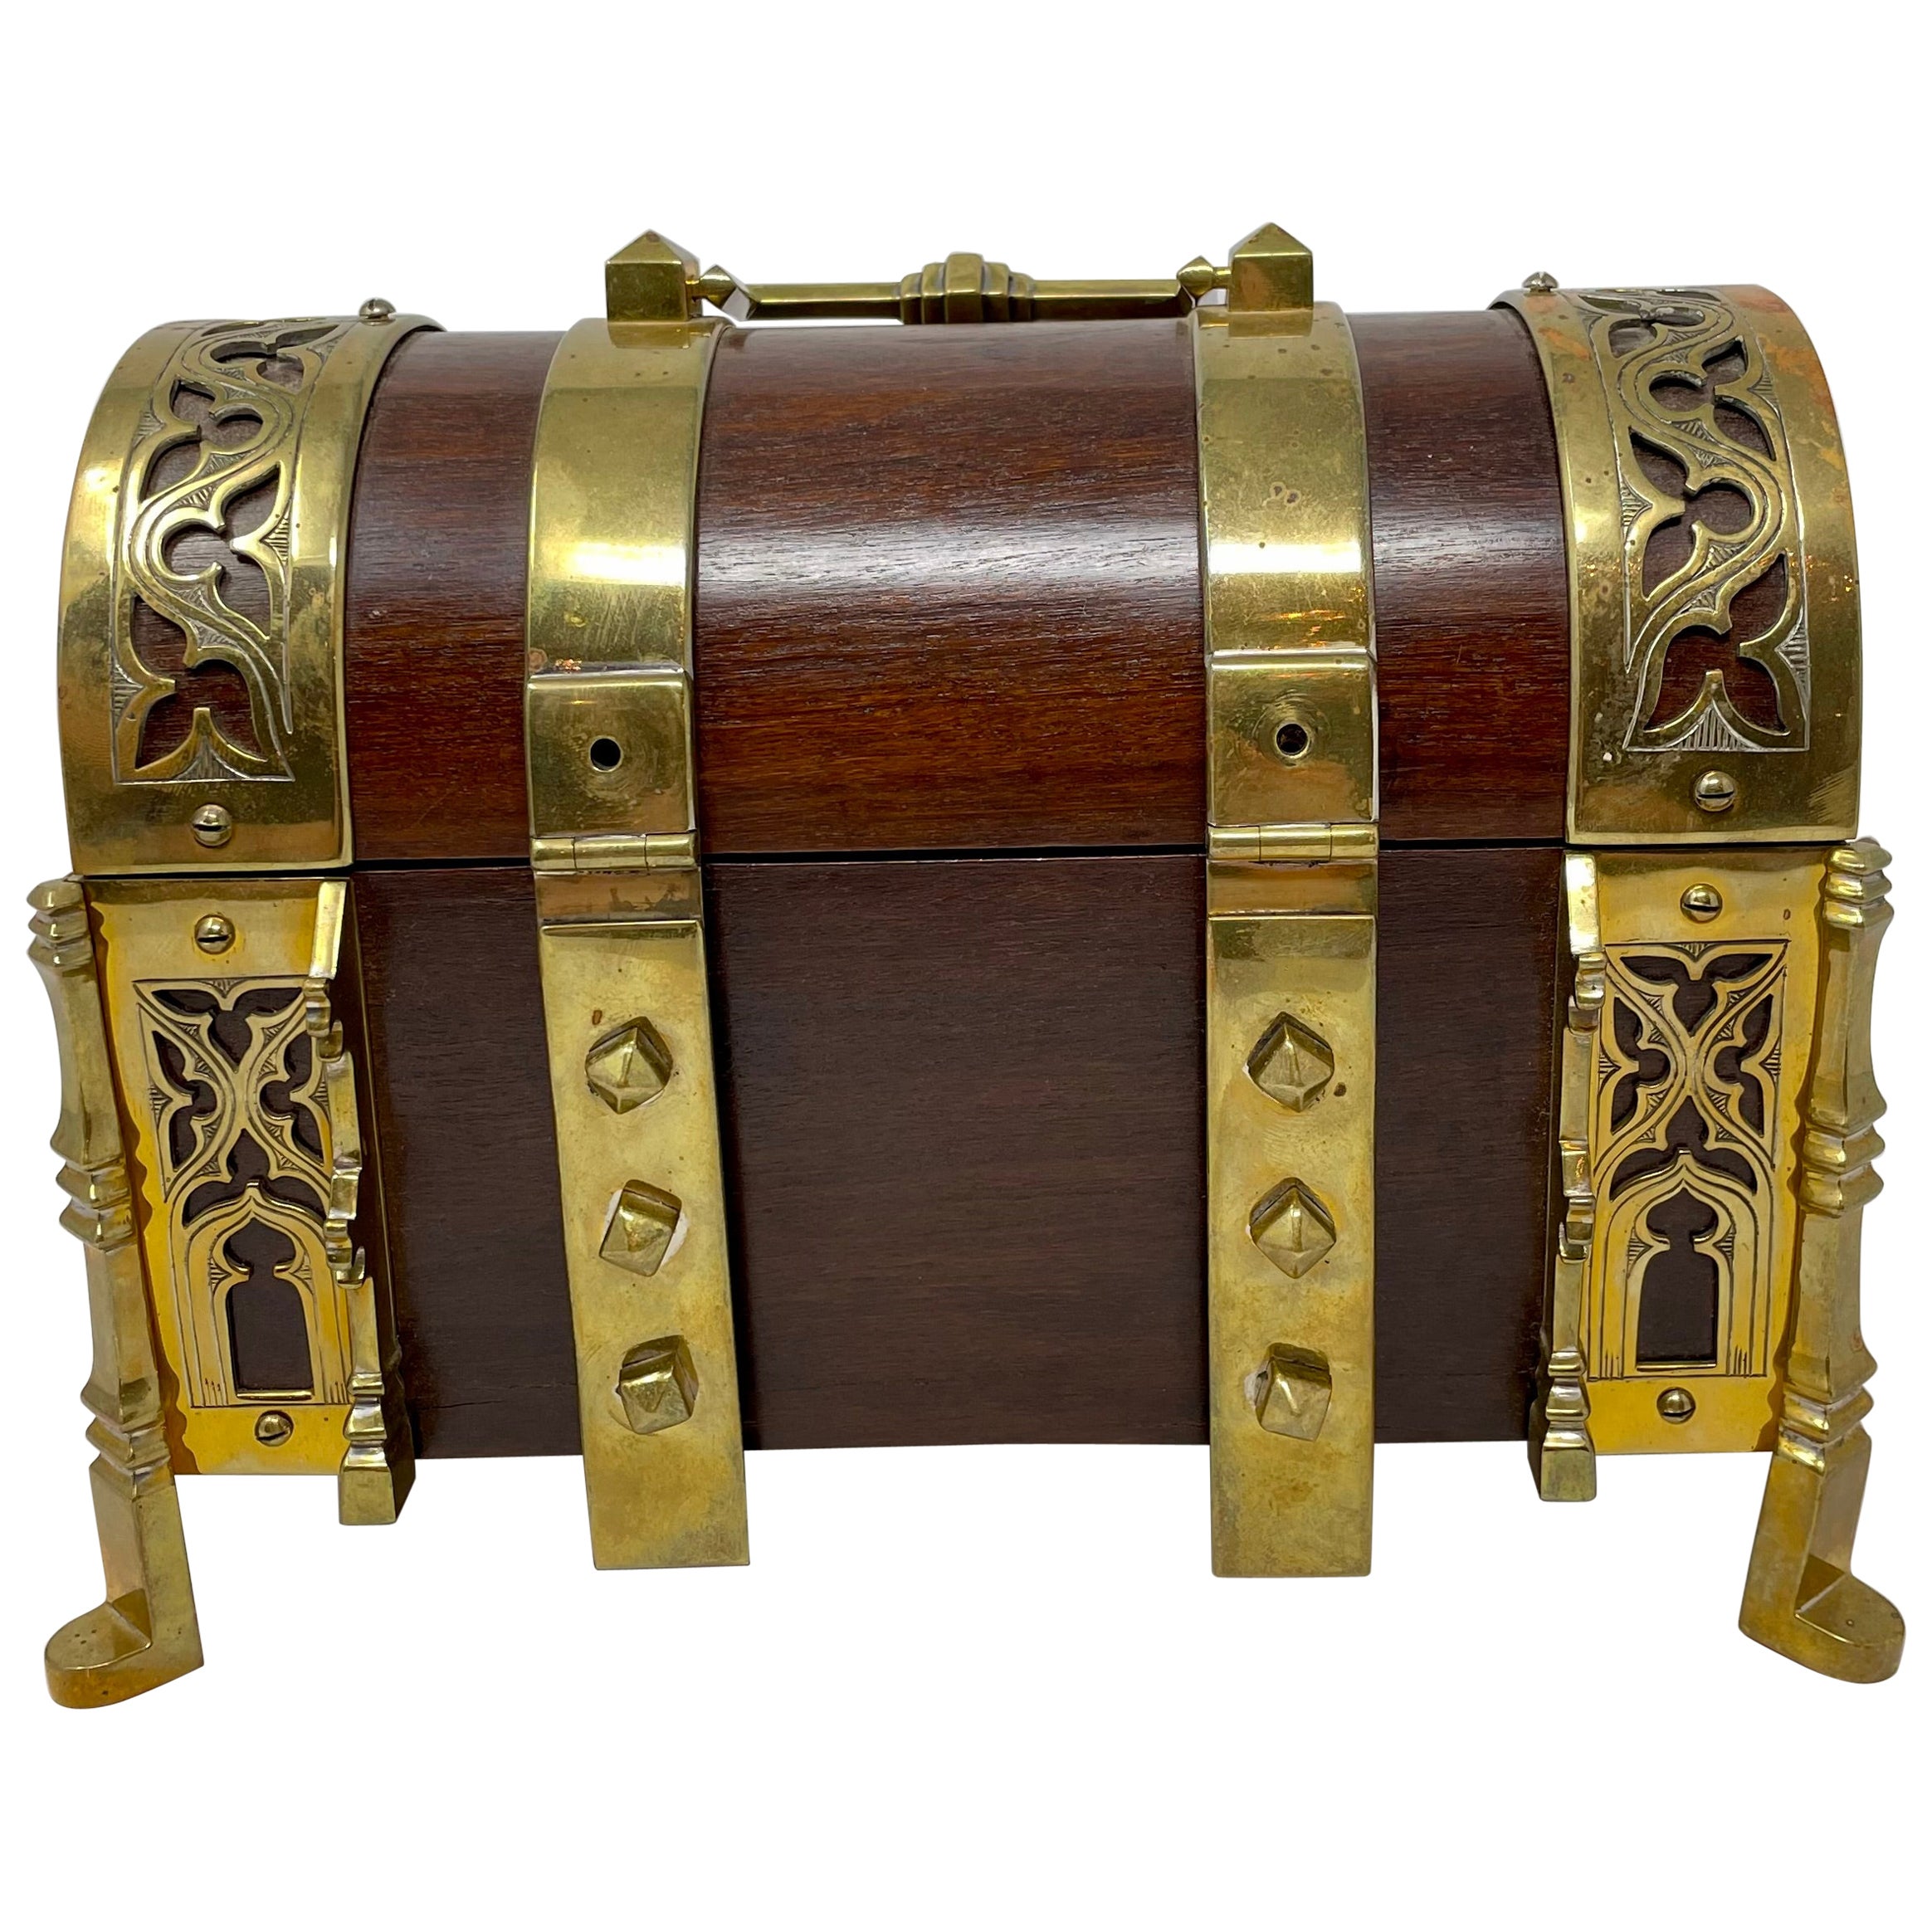 Antique English Mahogany with Brass Mounts Footed Jewel Box, Circa 1860. For Sale